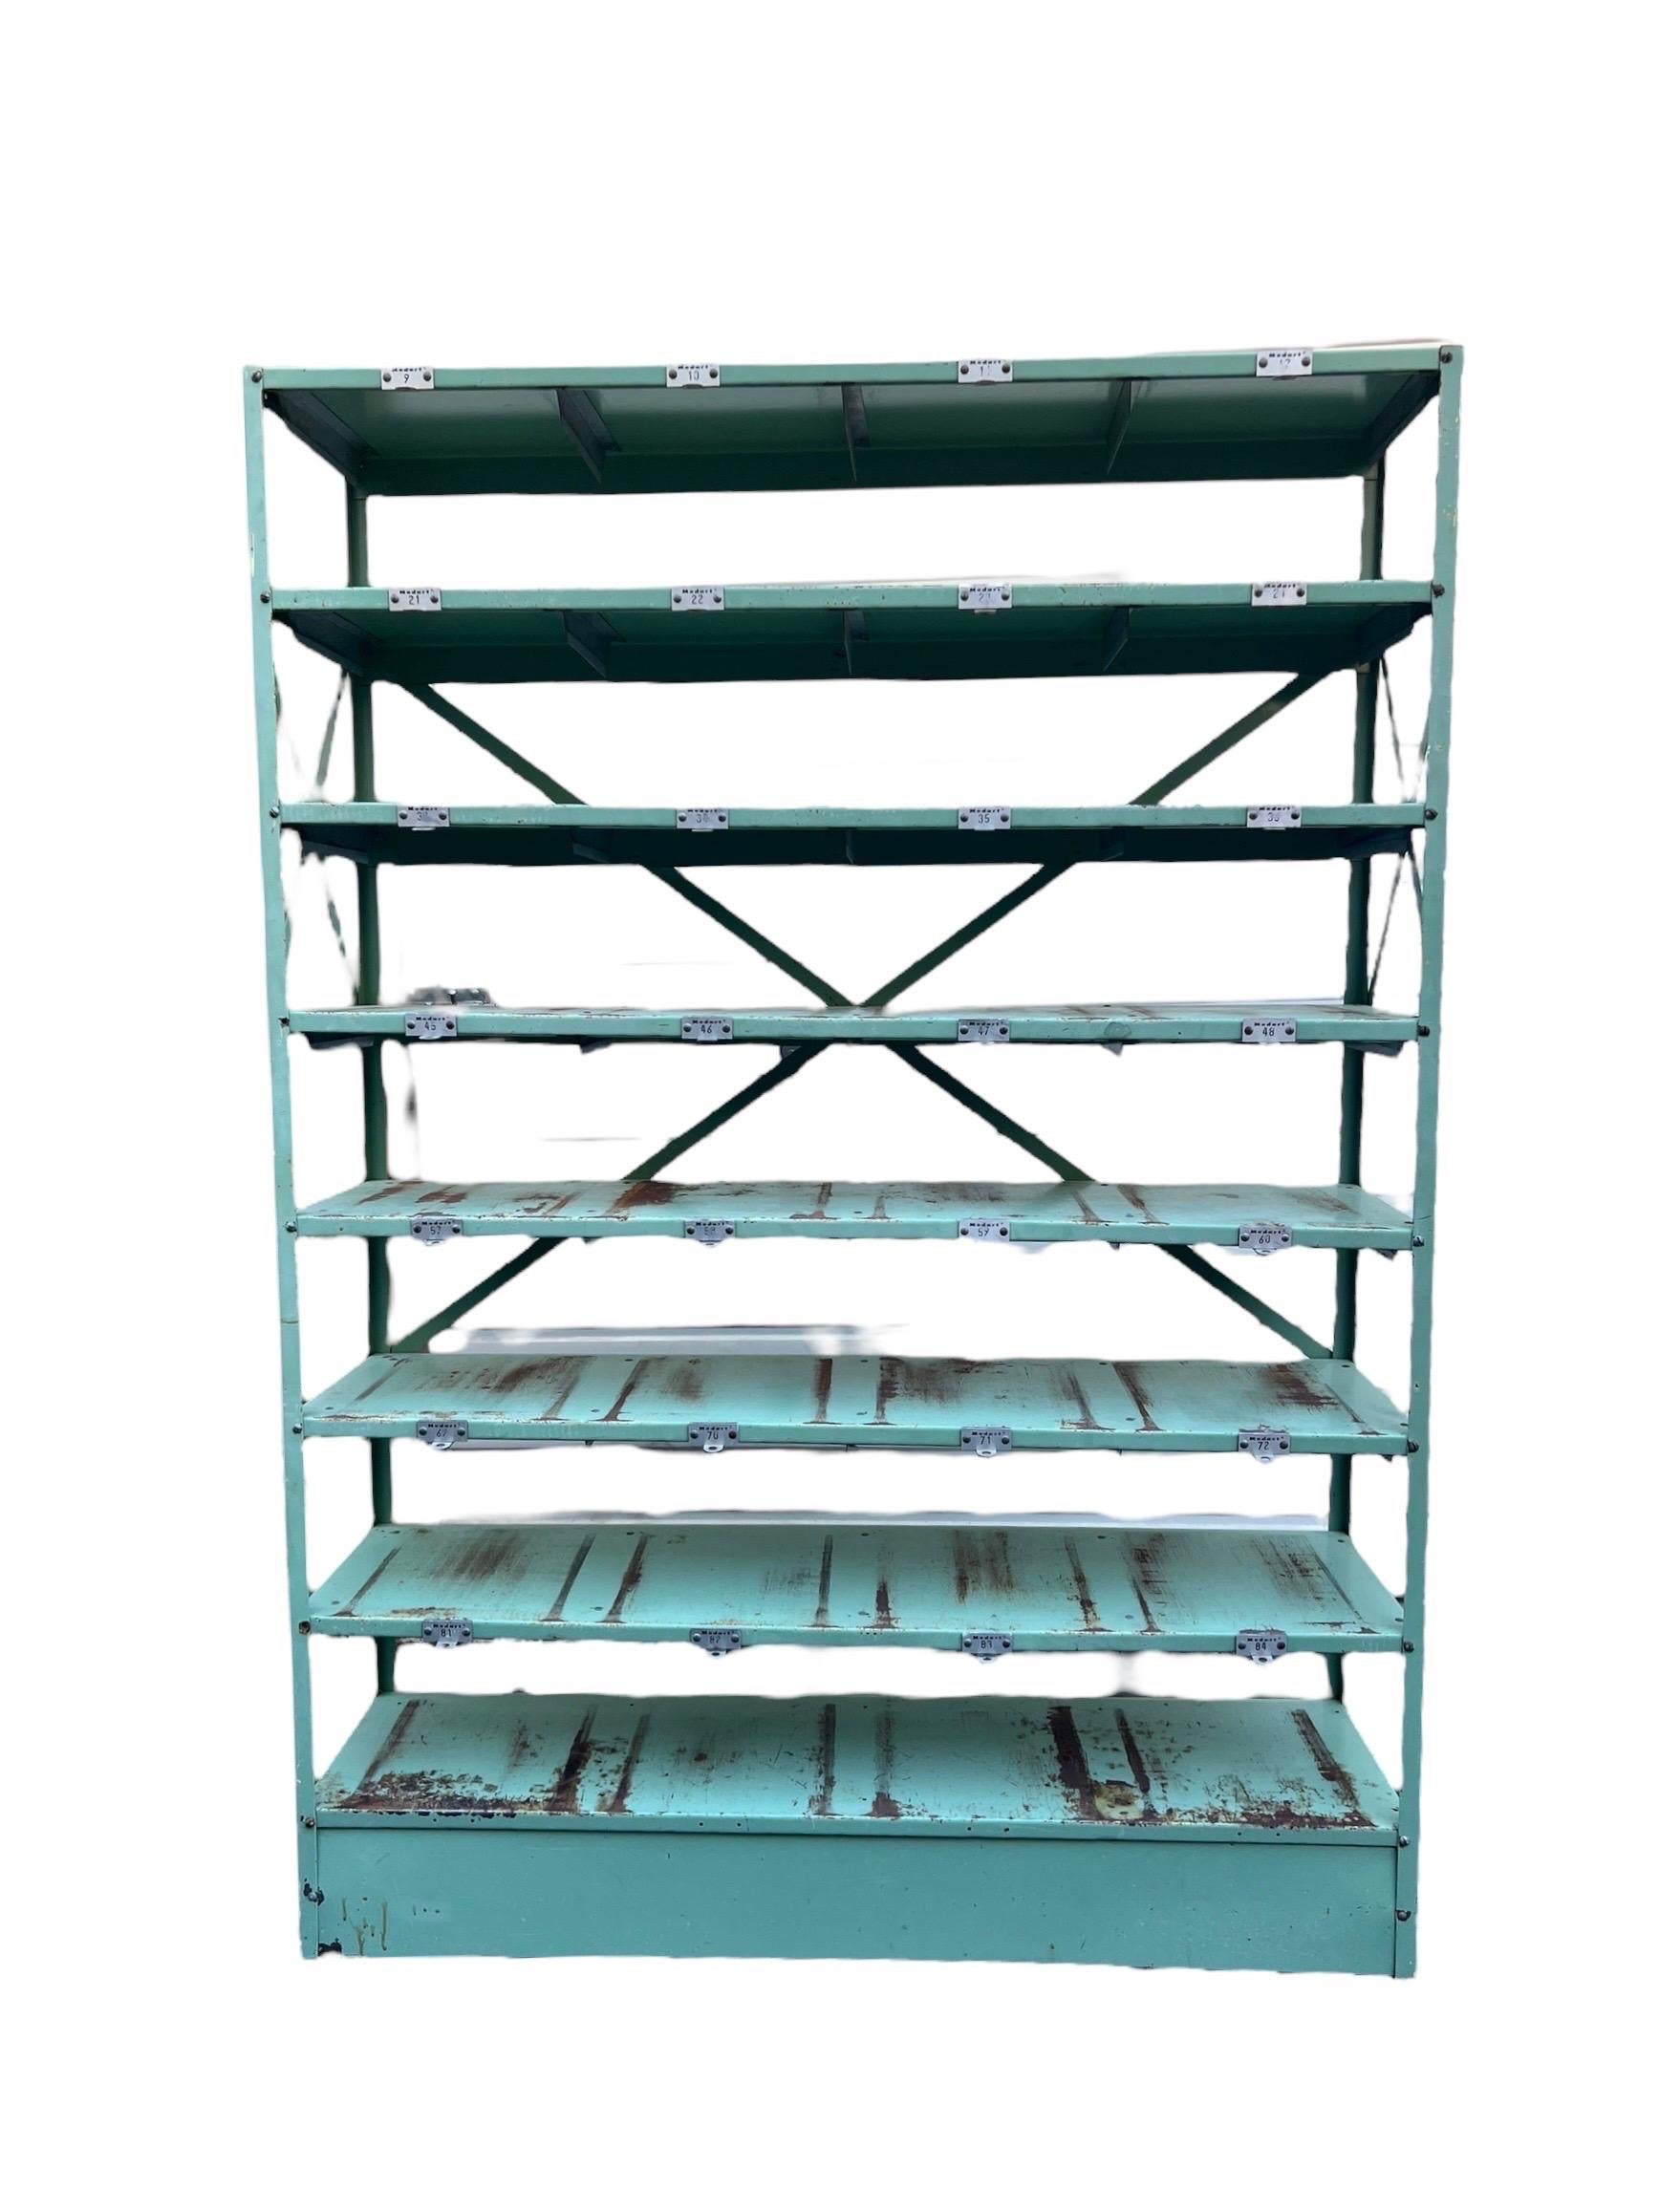 Industrial Metal Shelf Unit, Green Patina. This is a hardy and heavy industrial, rolling shelving unit. It has 7 compartments. It is painted green with great patina. Would look great in a shop, in a greenhouse, or your home.

Dimensions - 52W 14D